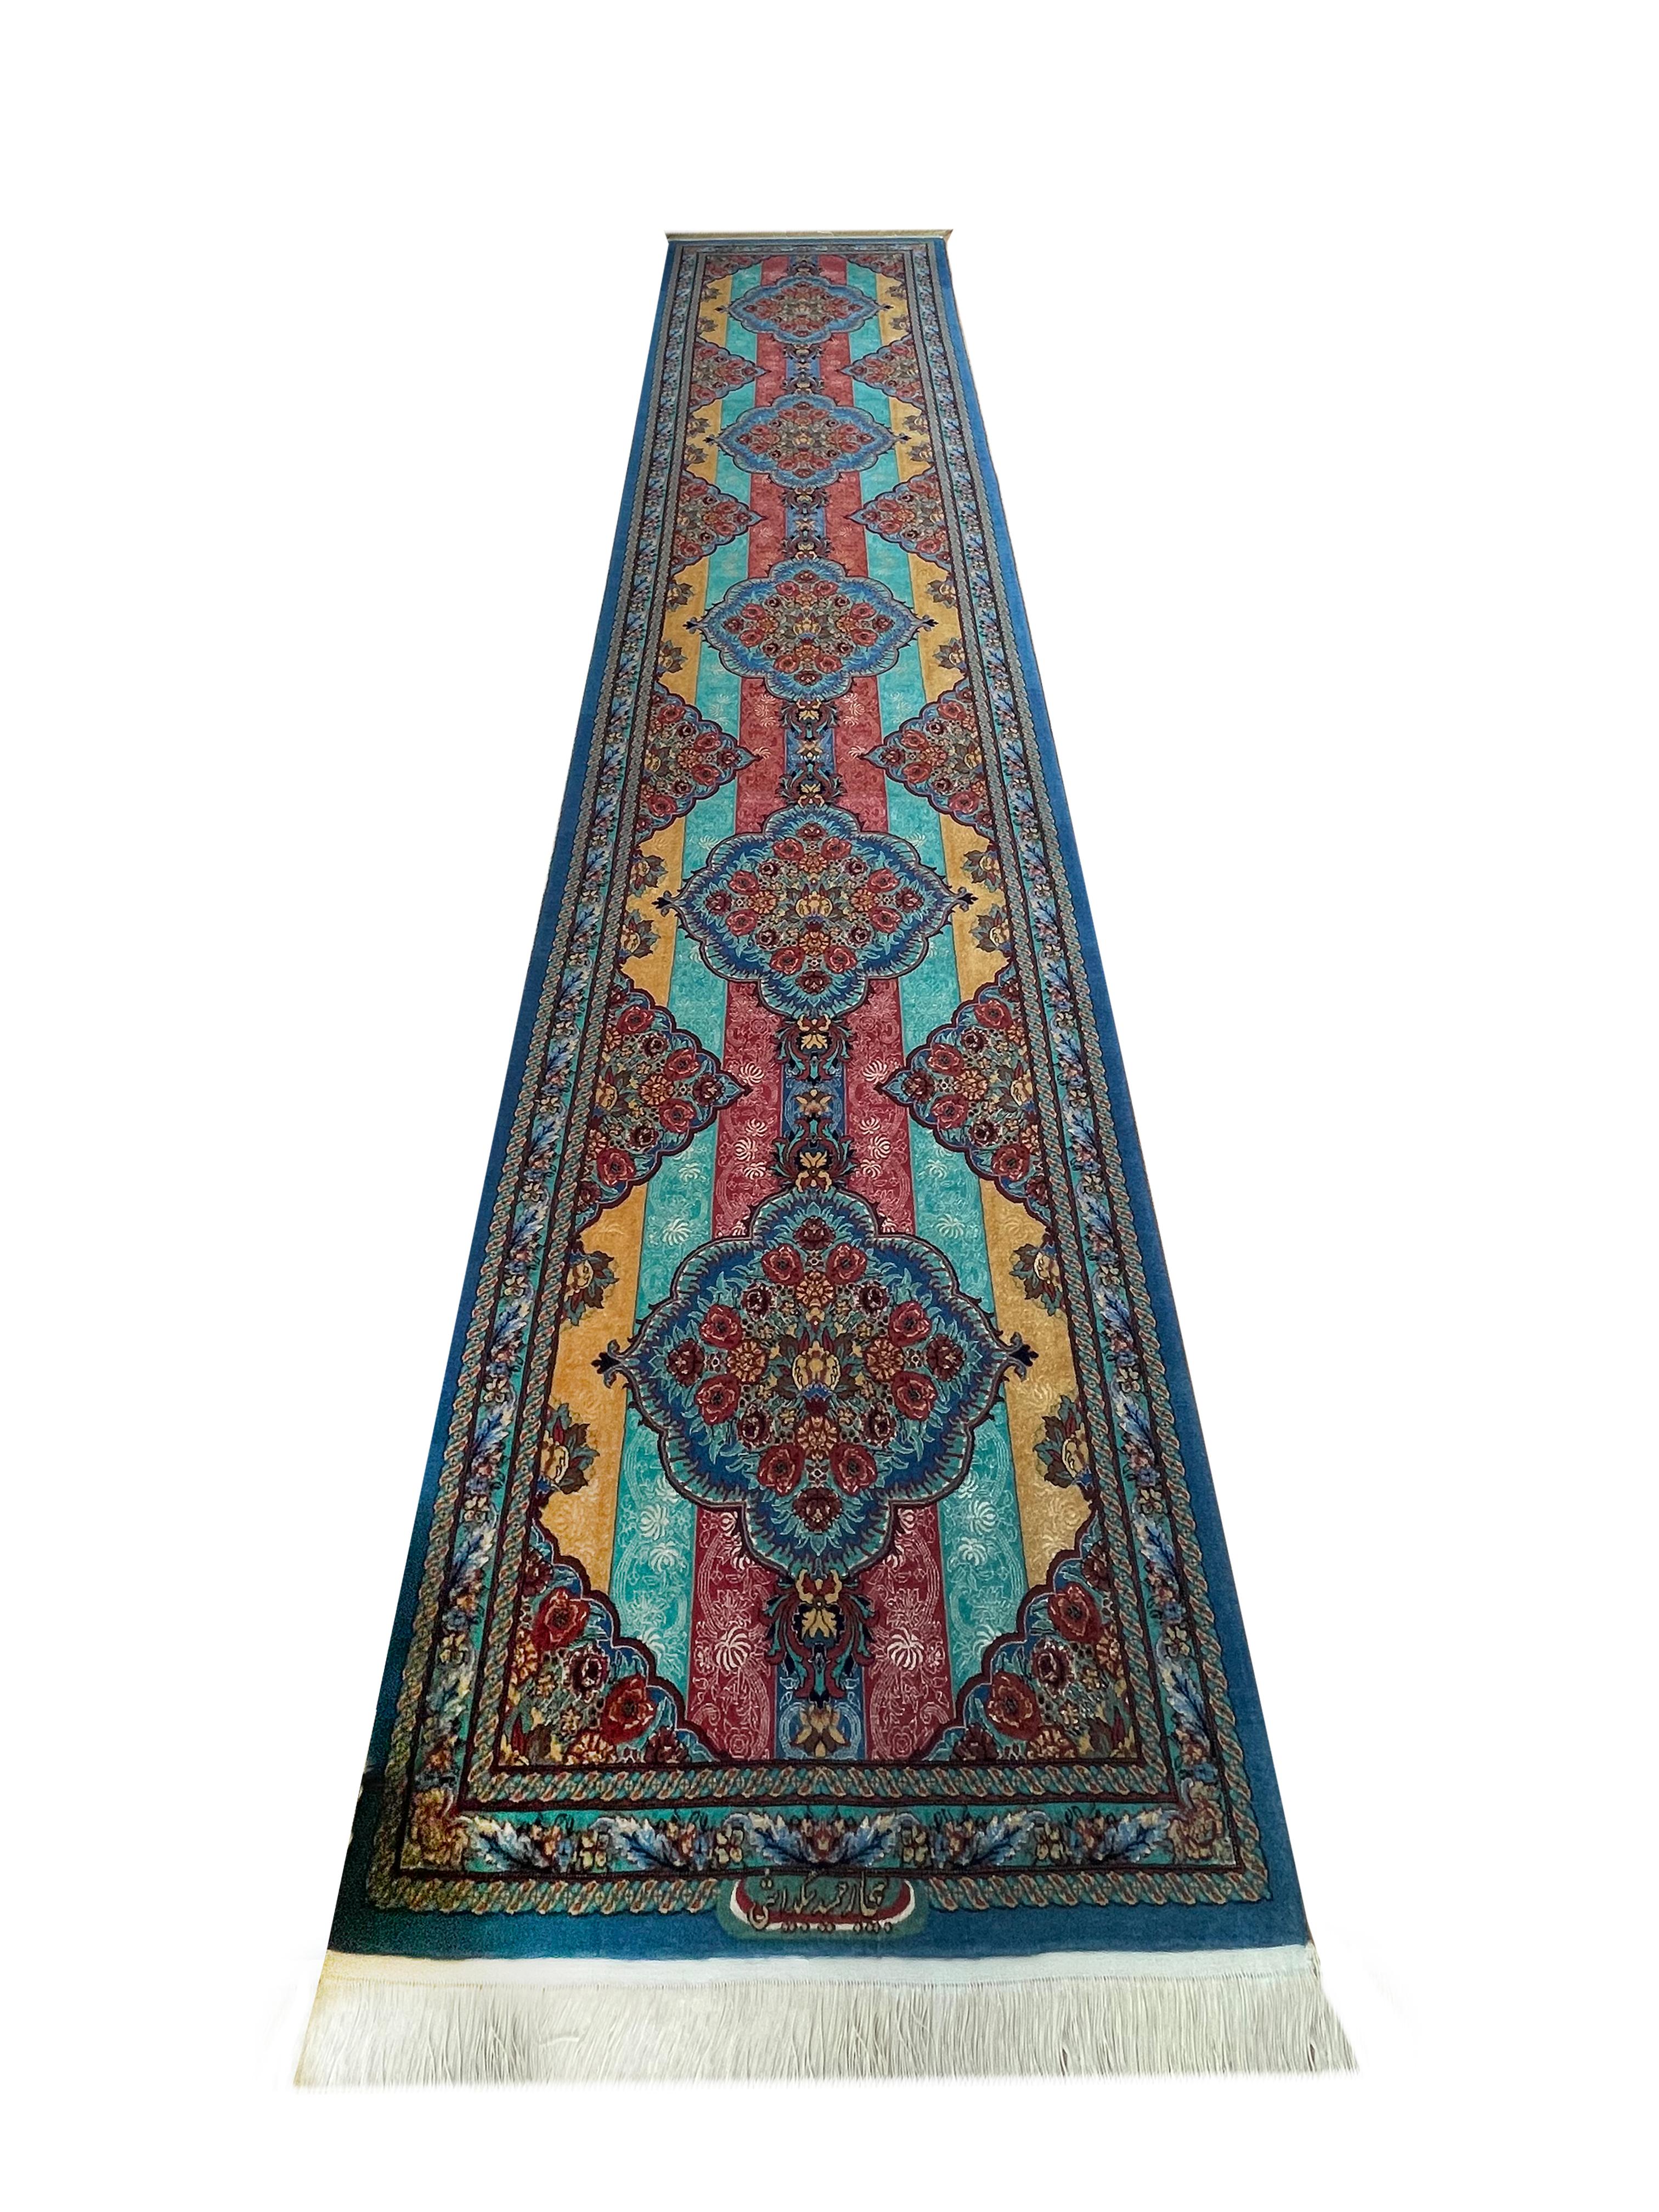 Exclusive magnificent handmade runner rug made of high-quality materials and designed from a very high-end rug workshop.
The background of this floral rug shows this glittery multicoloured rug as very vivid and shiny. 
The design of this rug